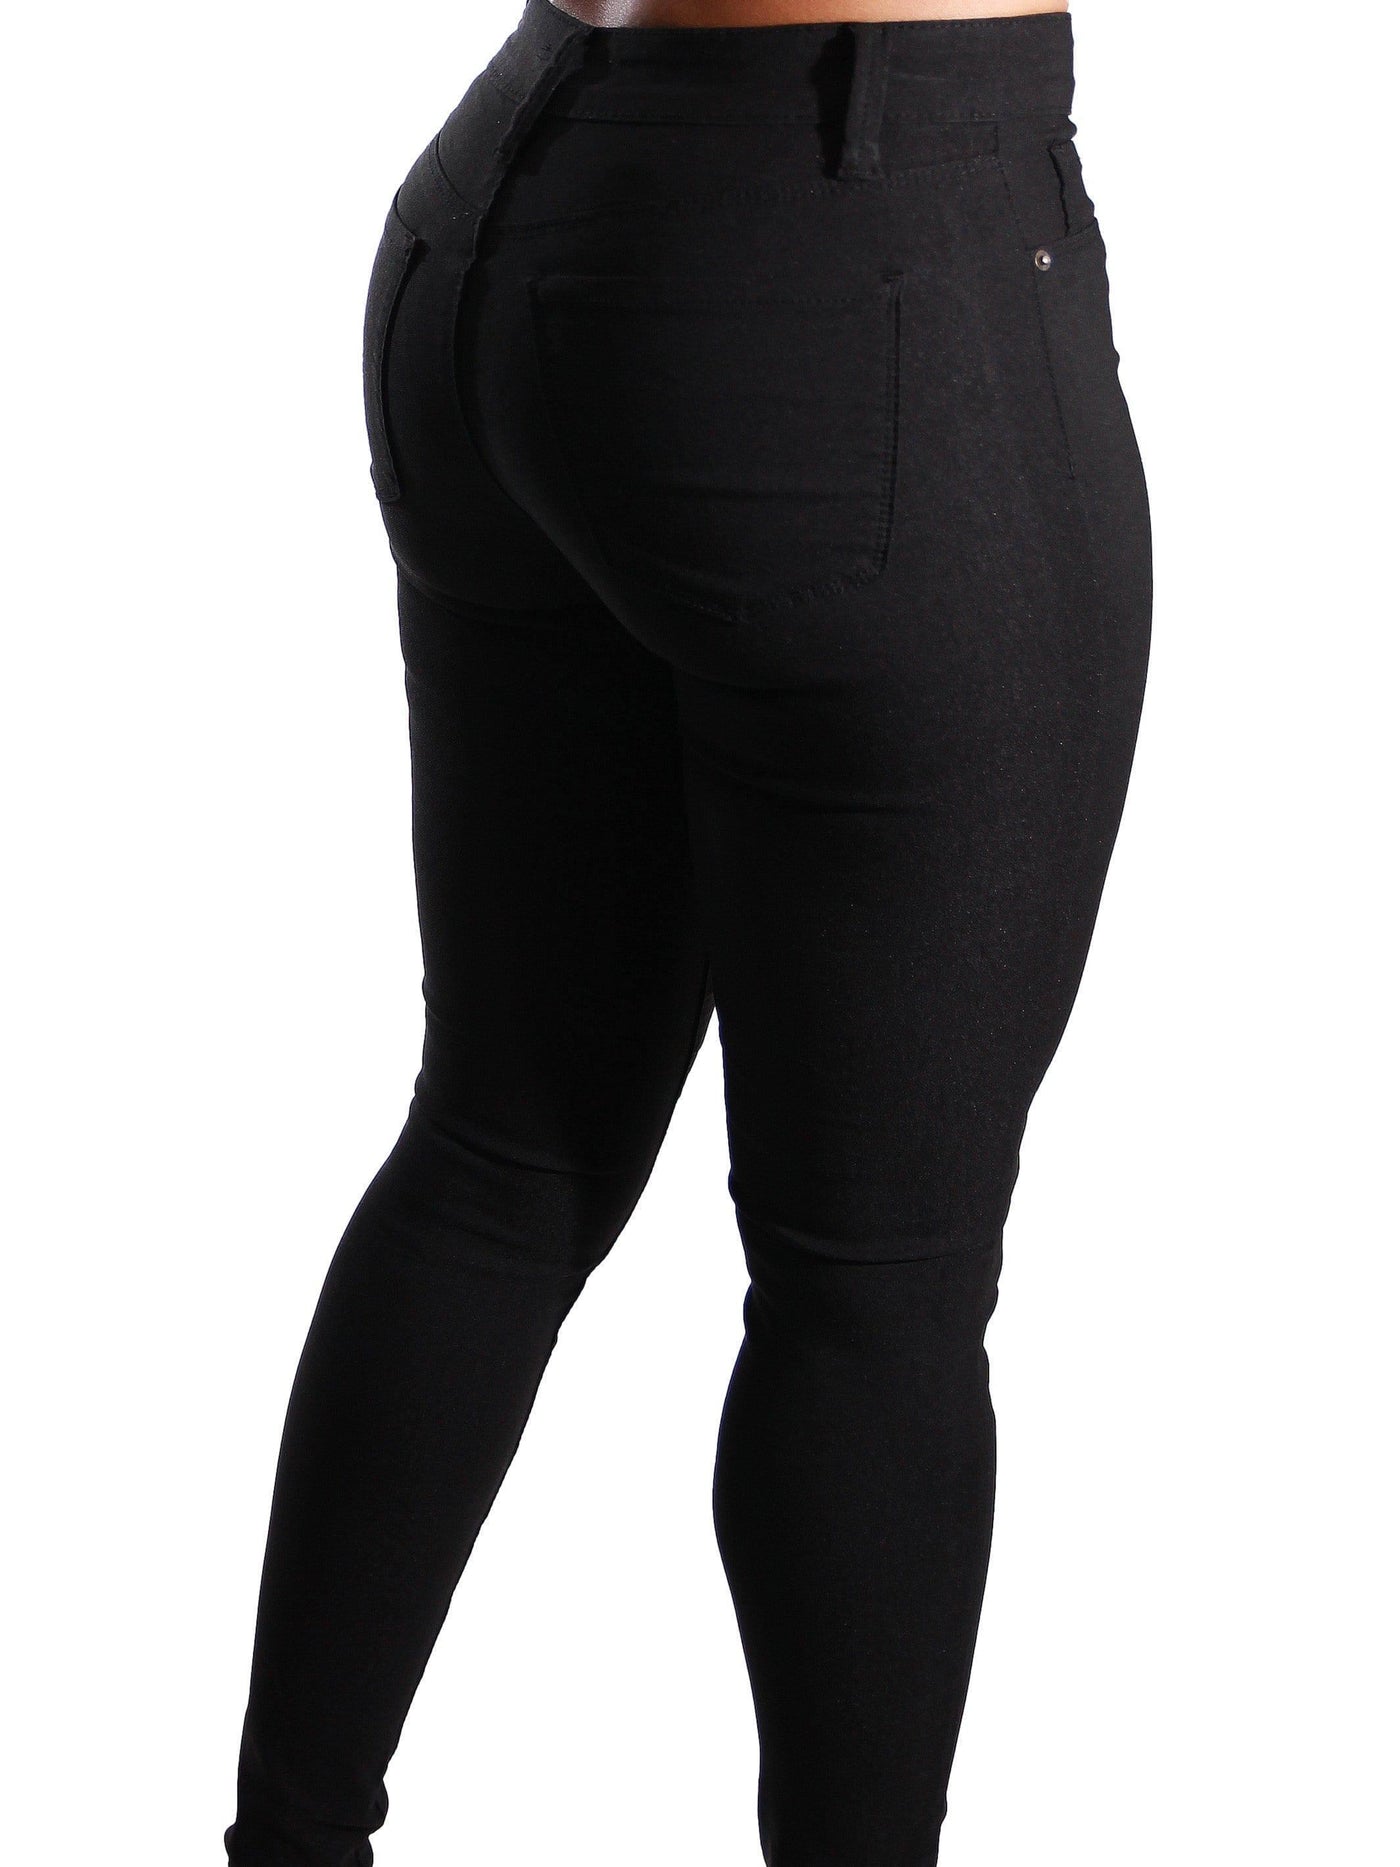 Get Stretchy | Skinny Pants Black SIZE X-LARGE - Statement Piece NY _tab_final-sale, _tab_size-chart, Black, Bottoms, Brooklyn Boutique, clearance, Fall, Fall Fashion, final, final sale, Last One, Long Pants, Misses, Monochrome, pants, Ships from USA, Skinny Fit, small, SPNY Exclusive, Standard Fall, statement, Statement Clothing, statement piece, Statement Piece Boutique, statement piece ny, Statement Pieces, Statement Pieces Boutique, Women's Boutique, Workwear, X-Large, XL Pants